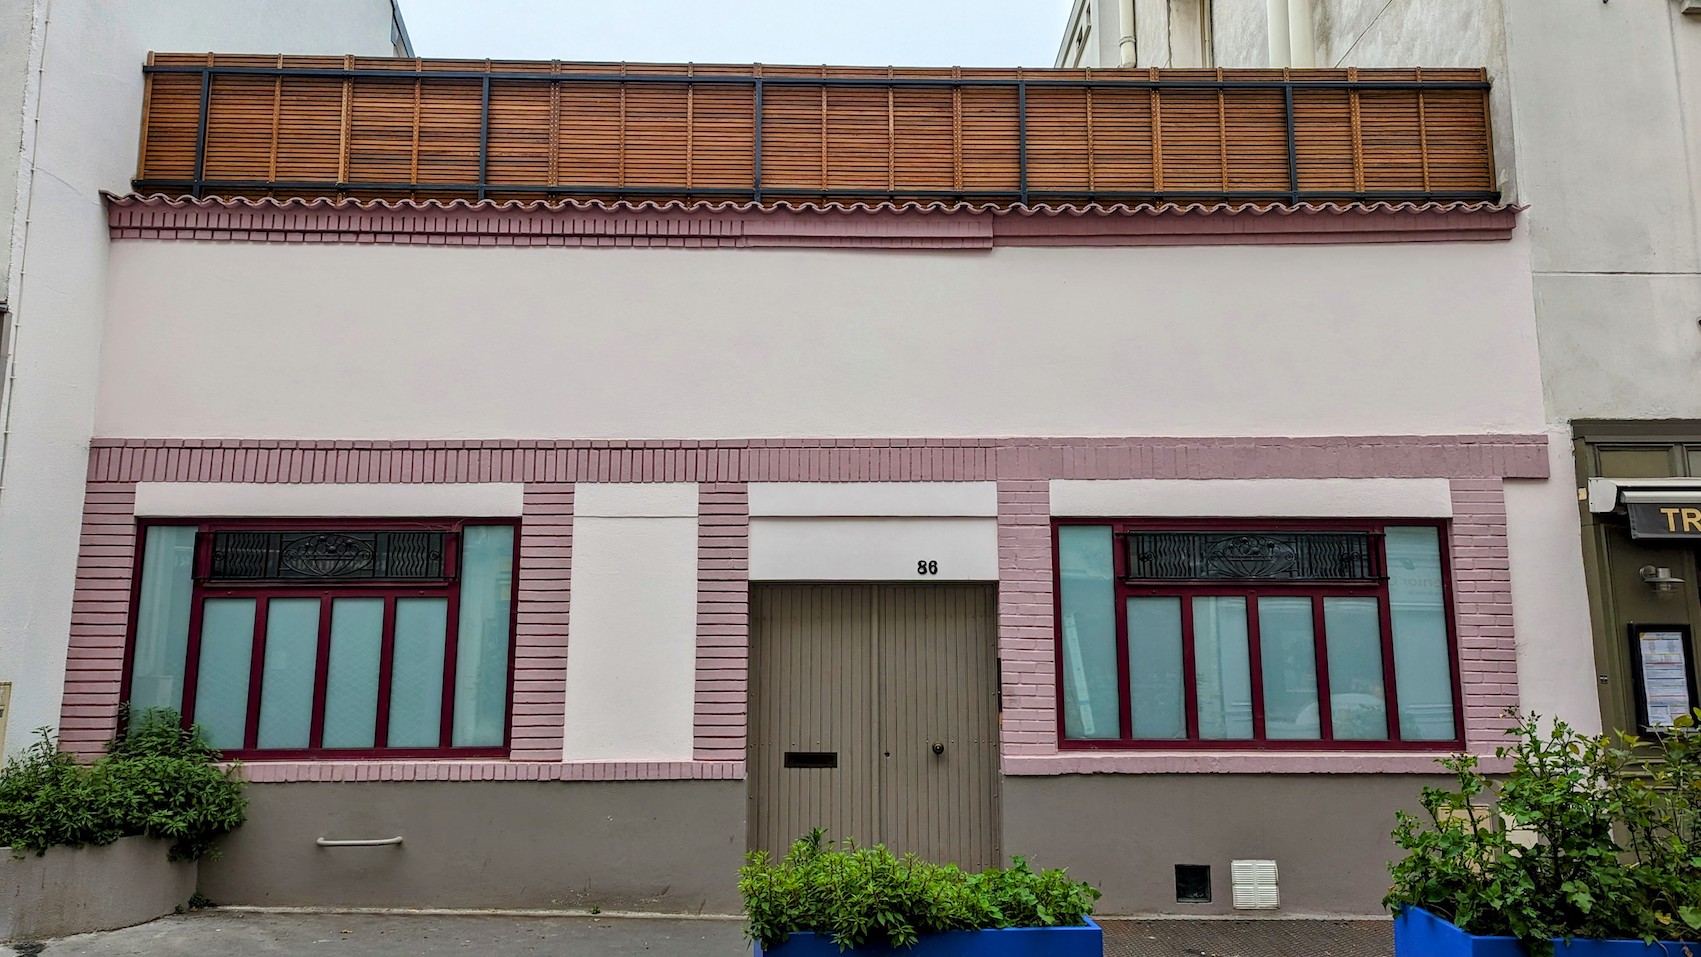 The small light pink house on Rue Daguerre, which used to belong to film maker Agnès Varda.